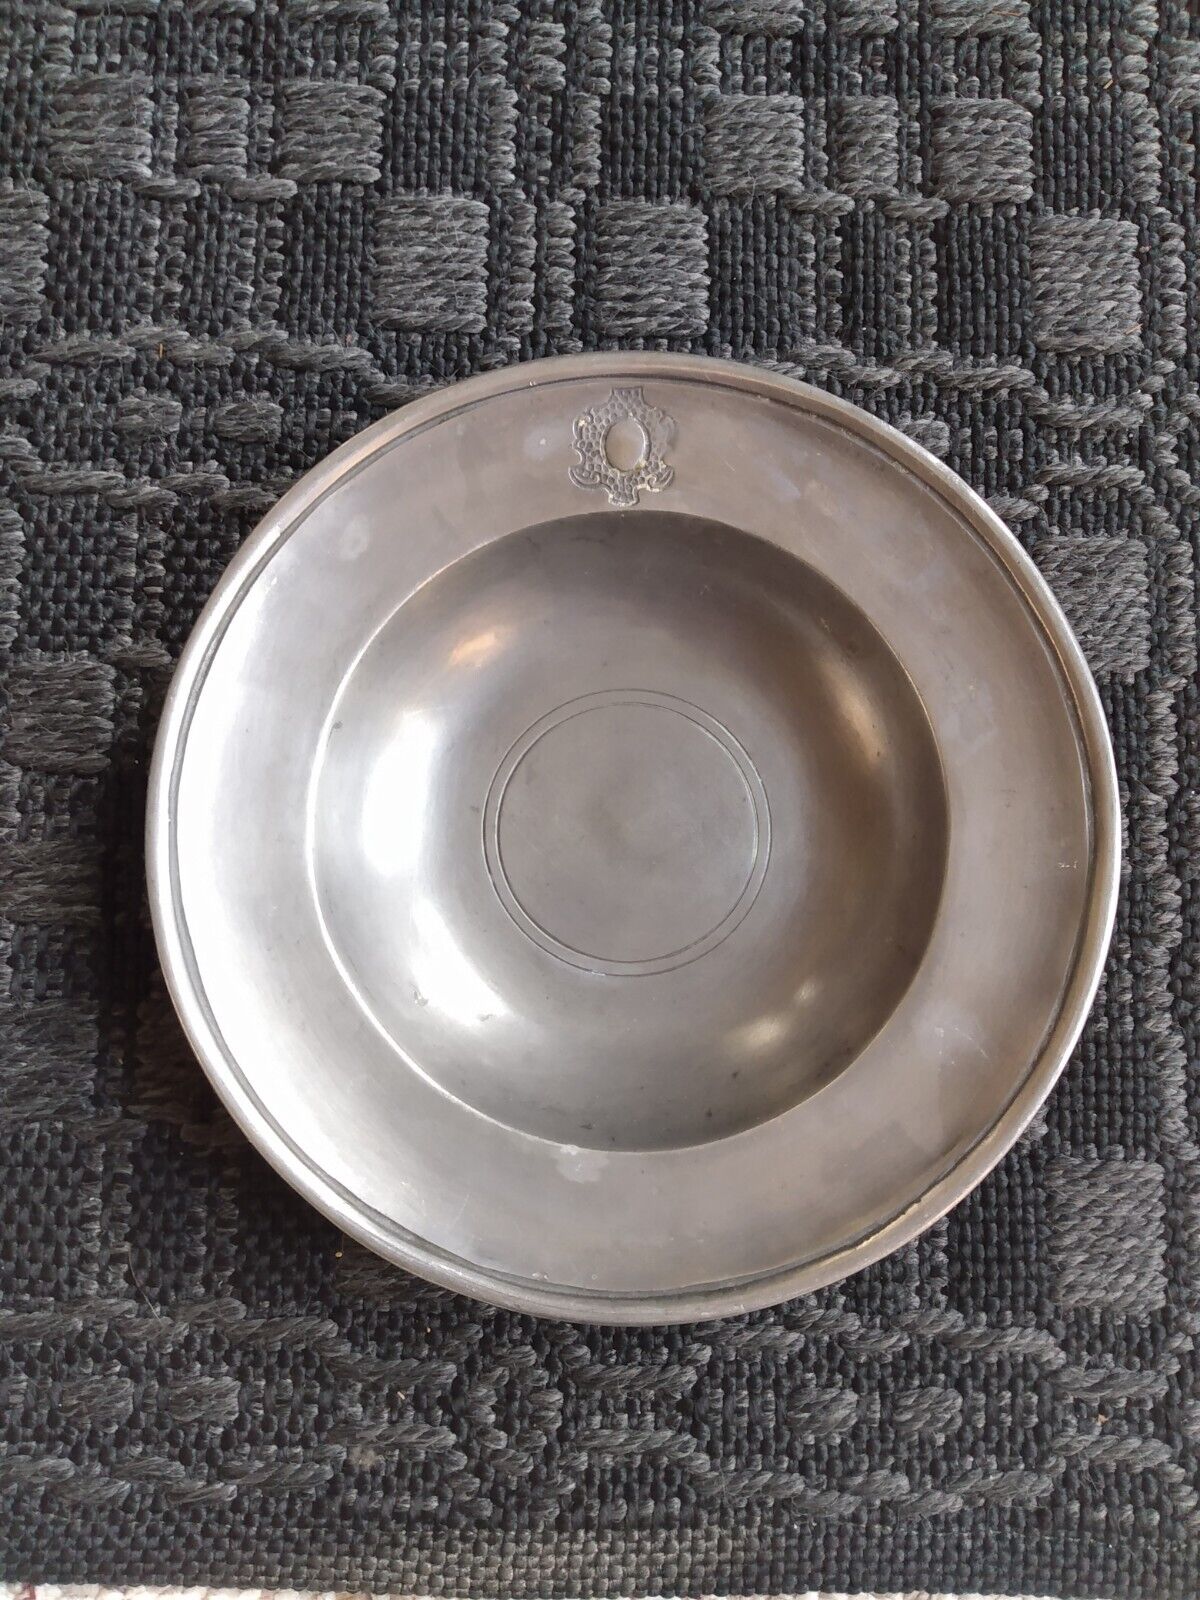 Inscribed 18th C Antique European or German Pewter Bowl Small Deep Plate Dish